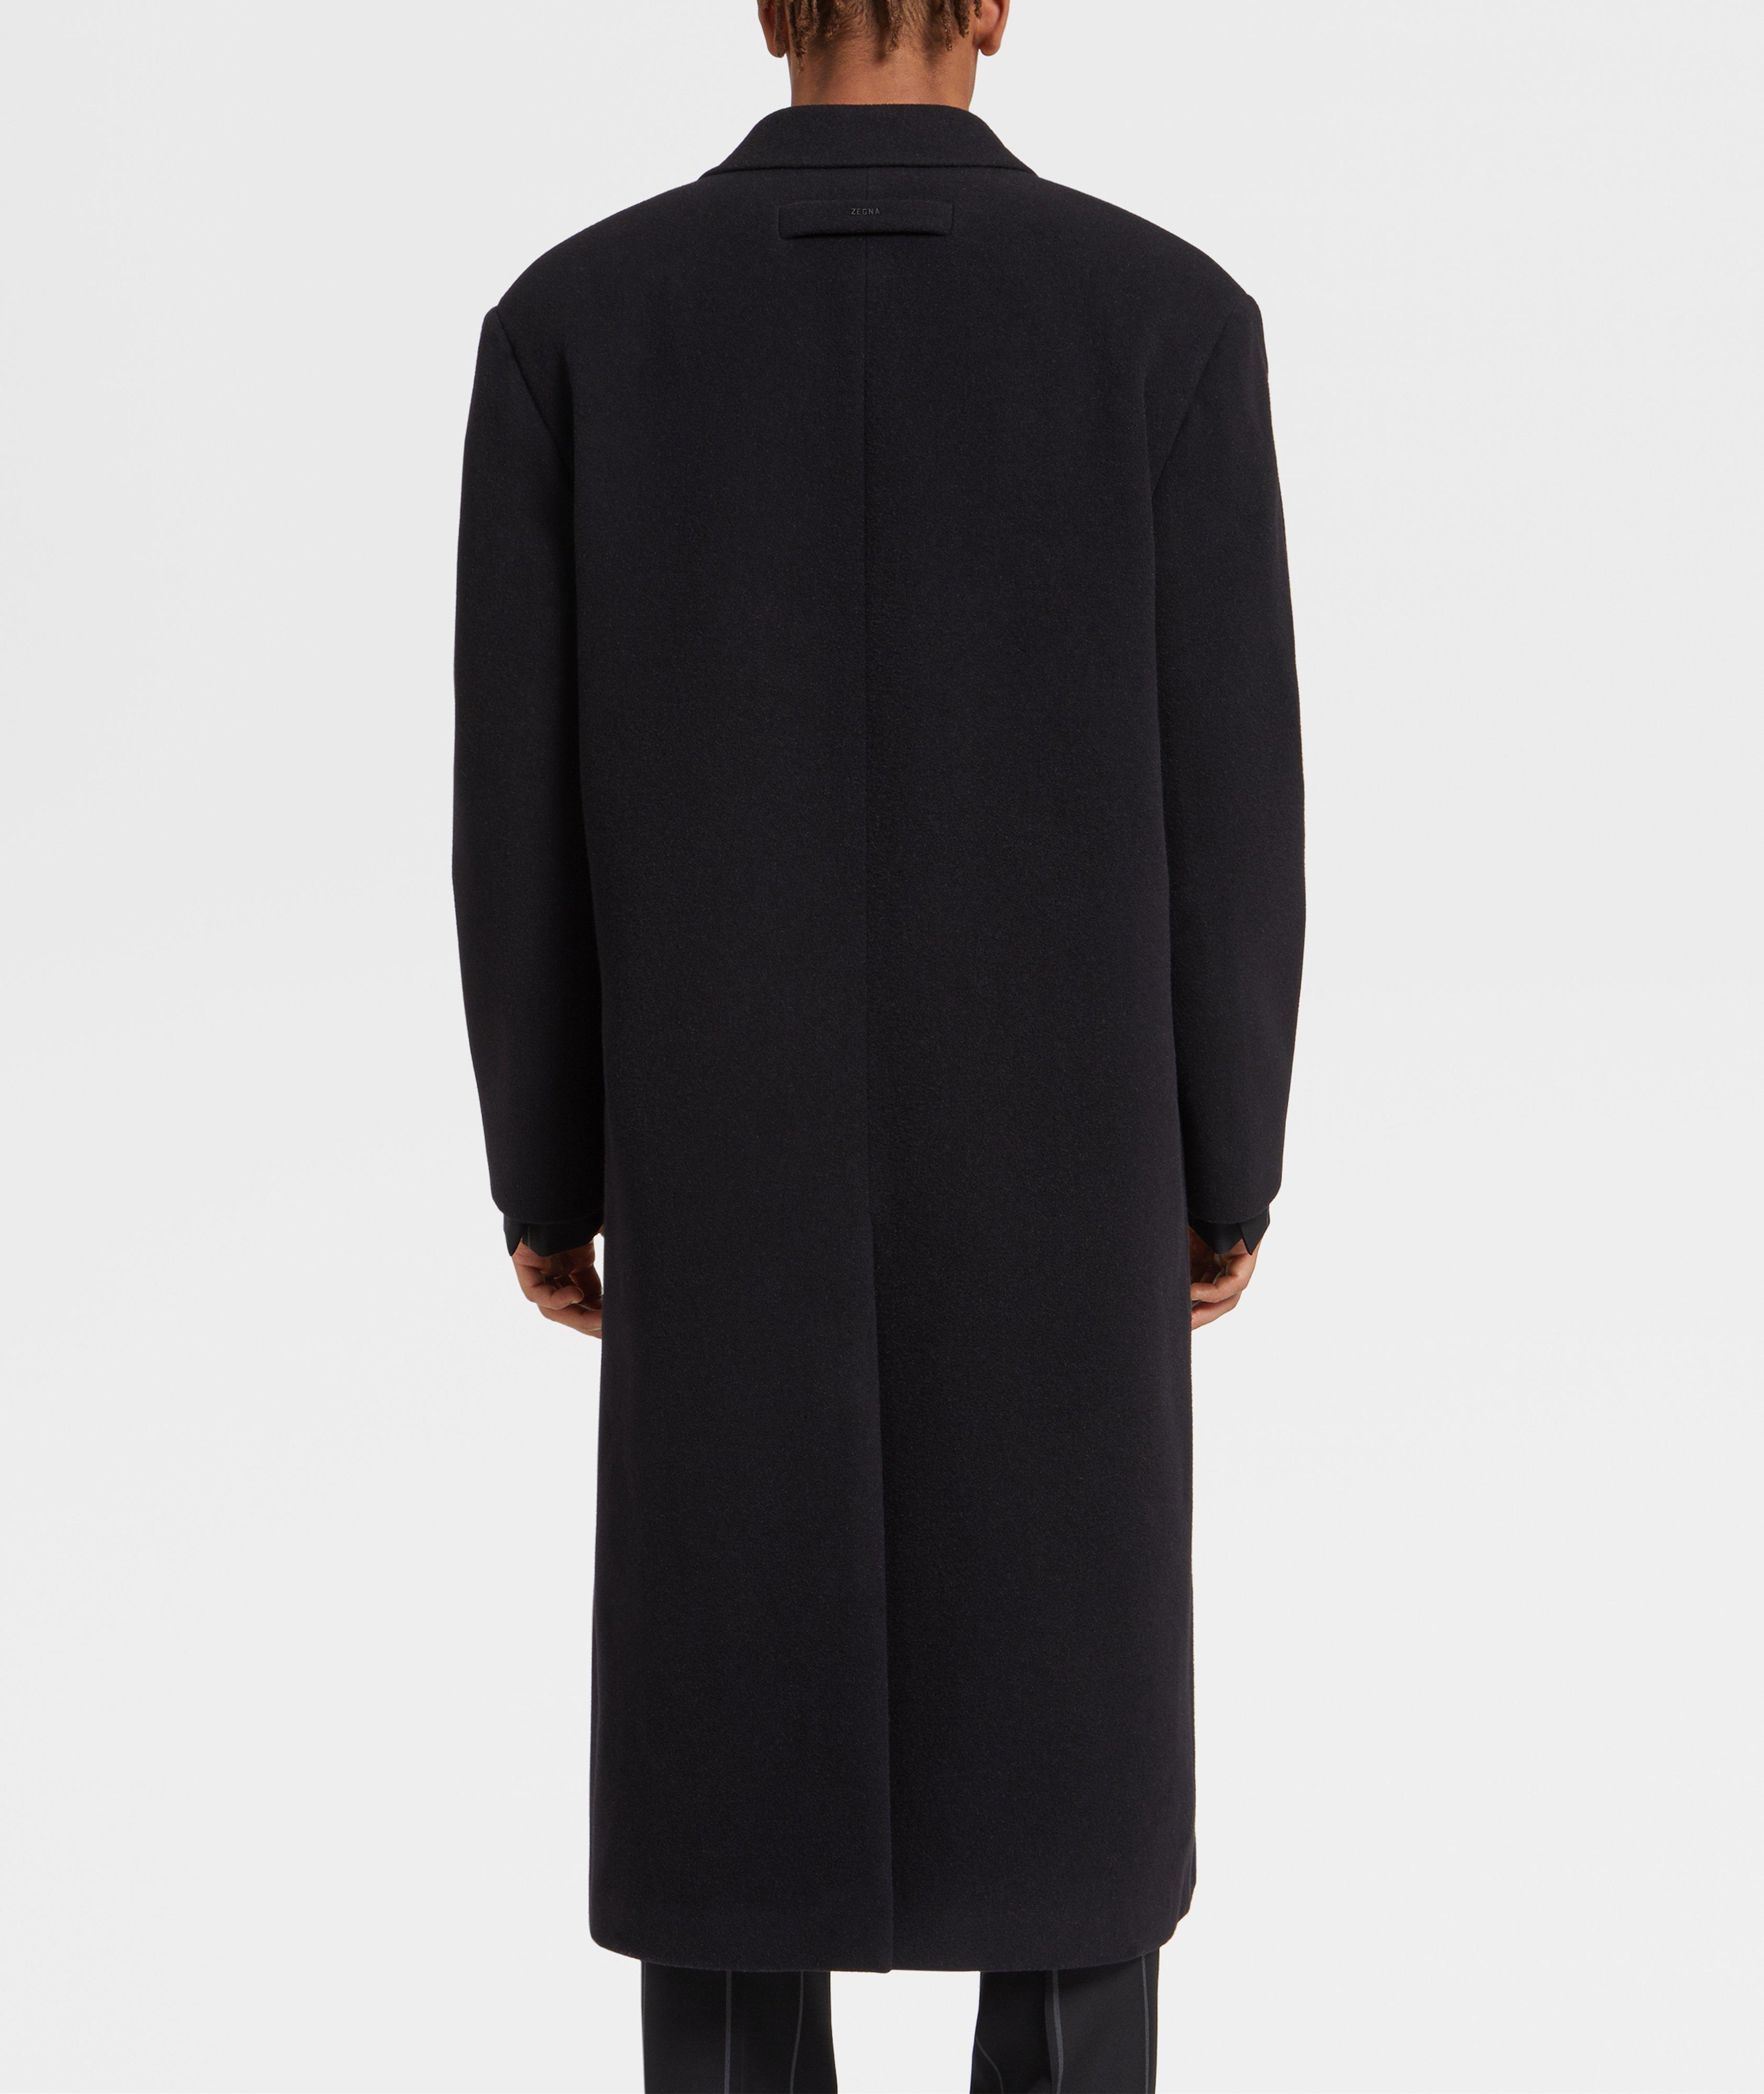 Double-Breasted Wool Coat image 2